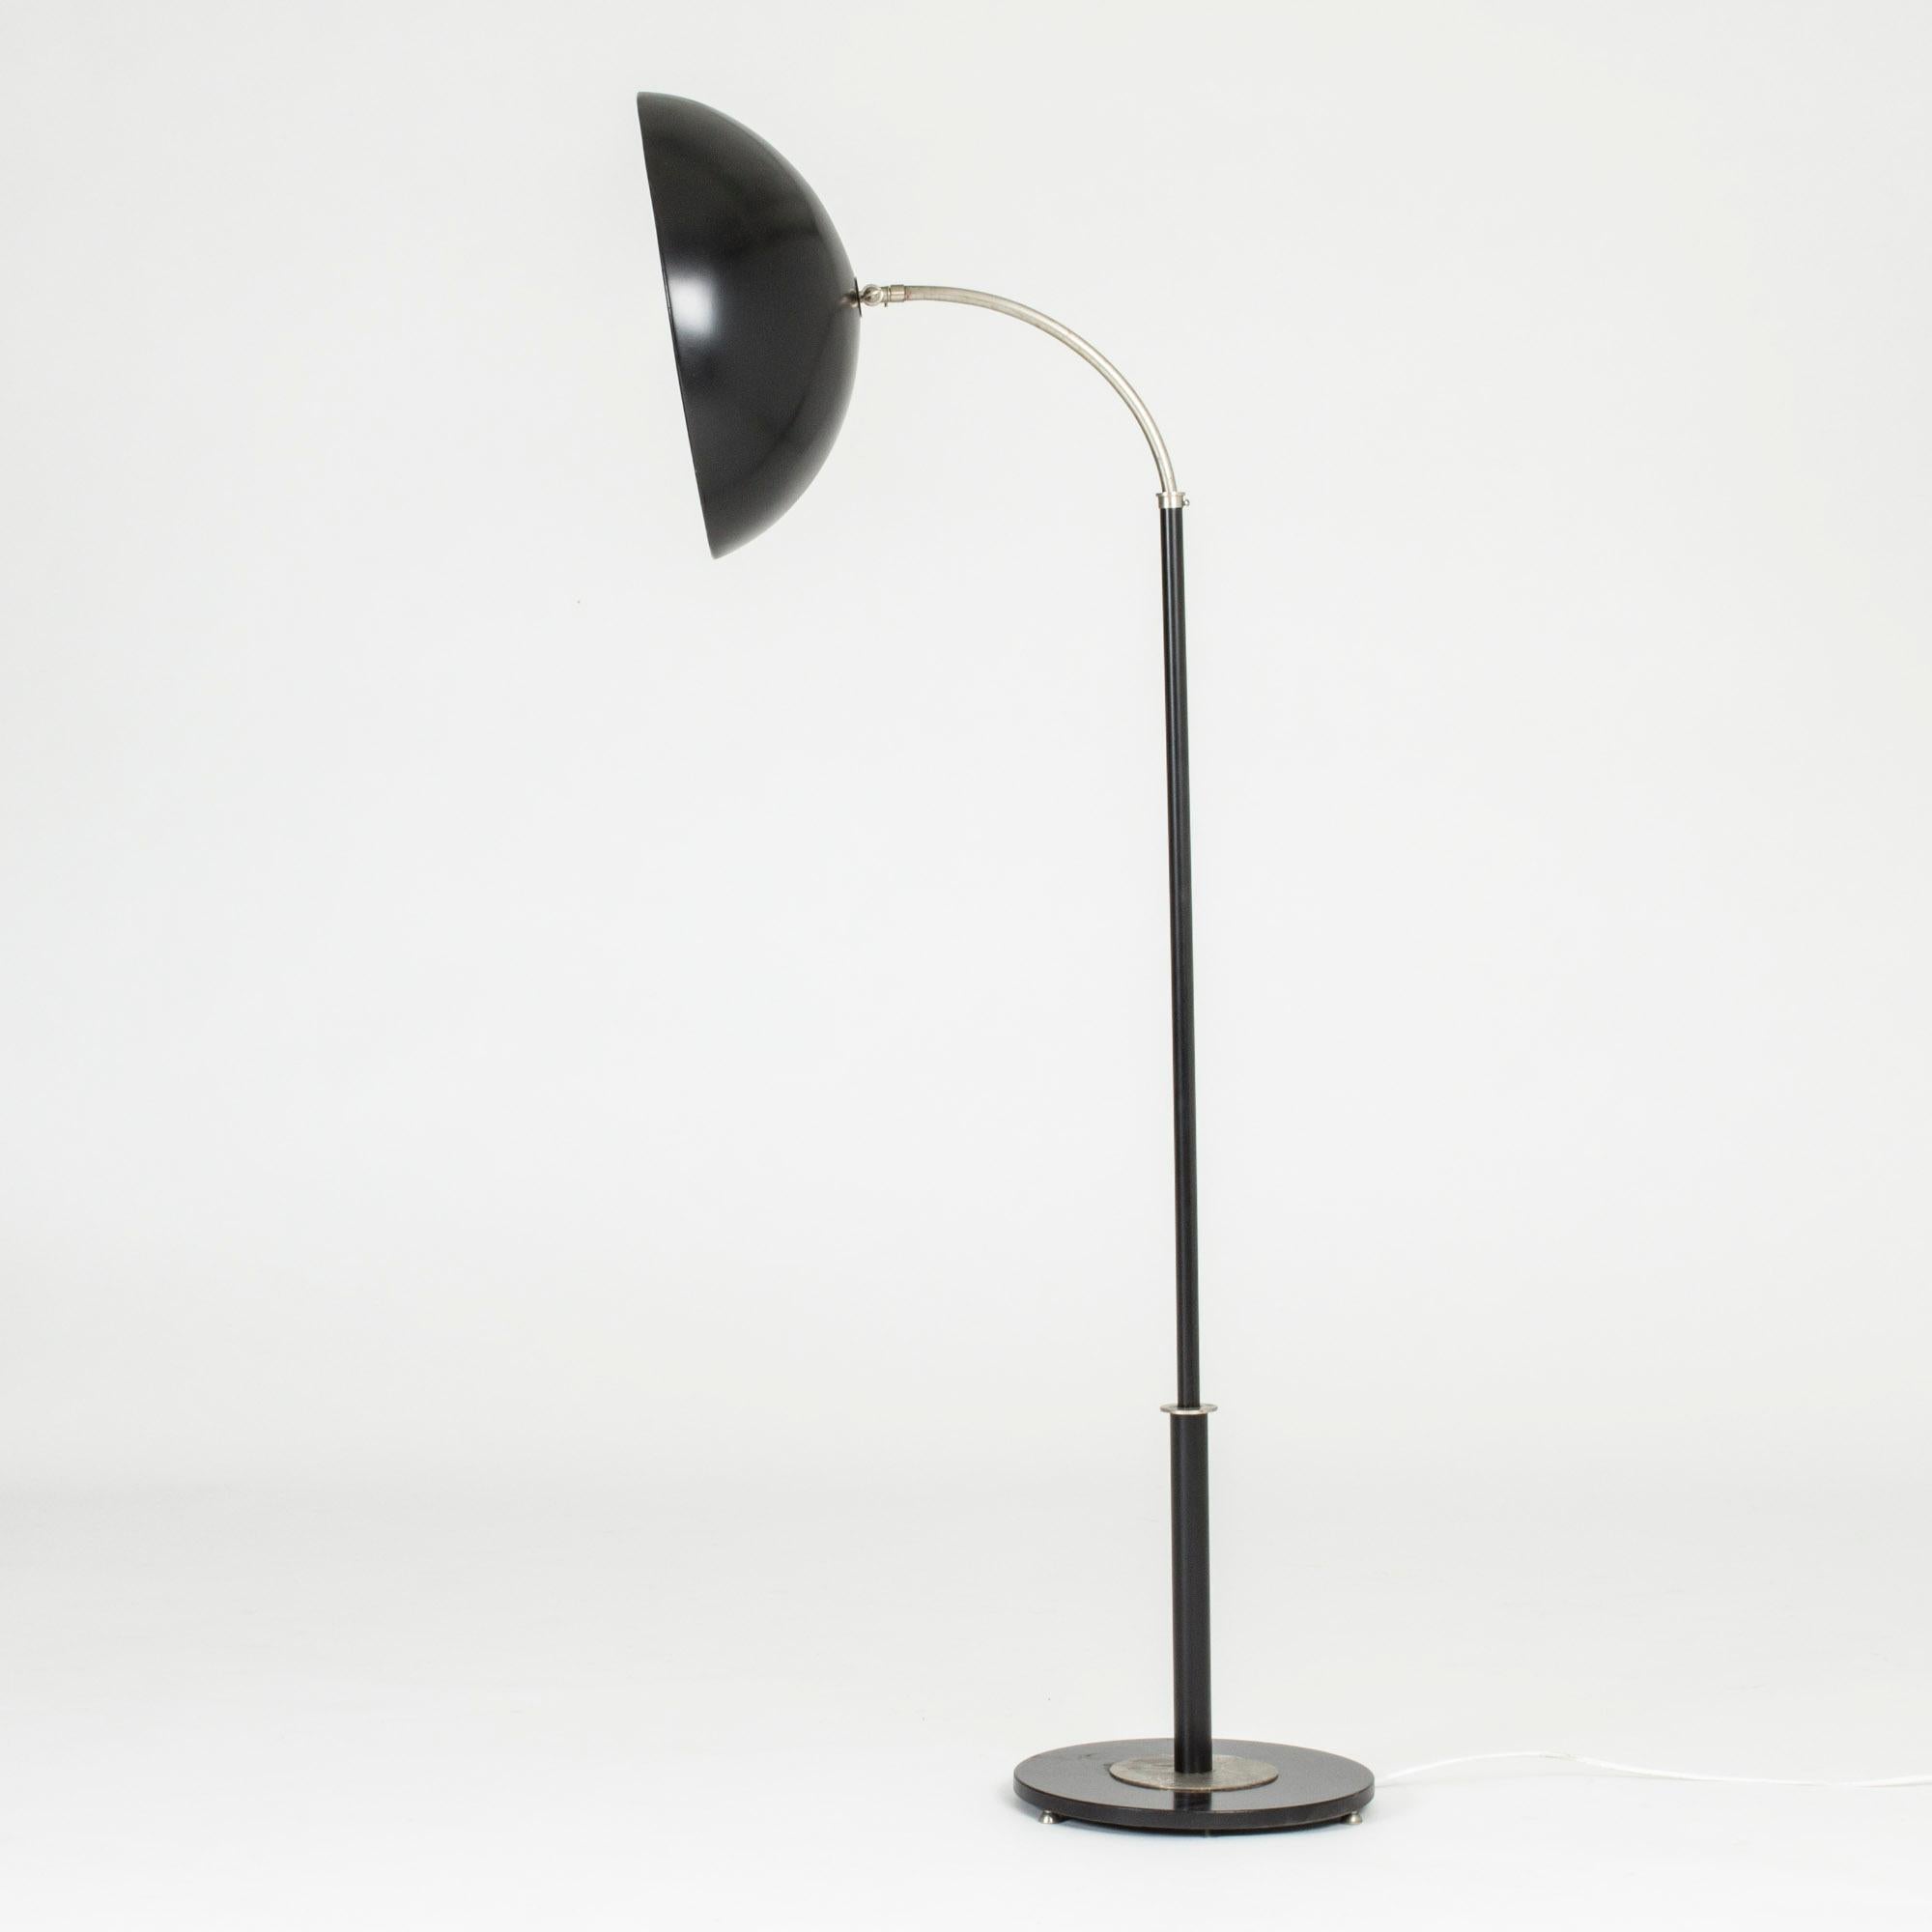 Striking functionalist floor lamp by Bo Notini, made from steel with a black lacquered shade and base.